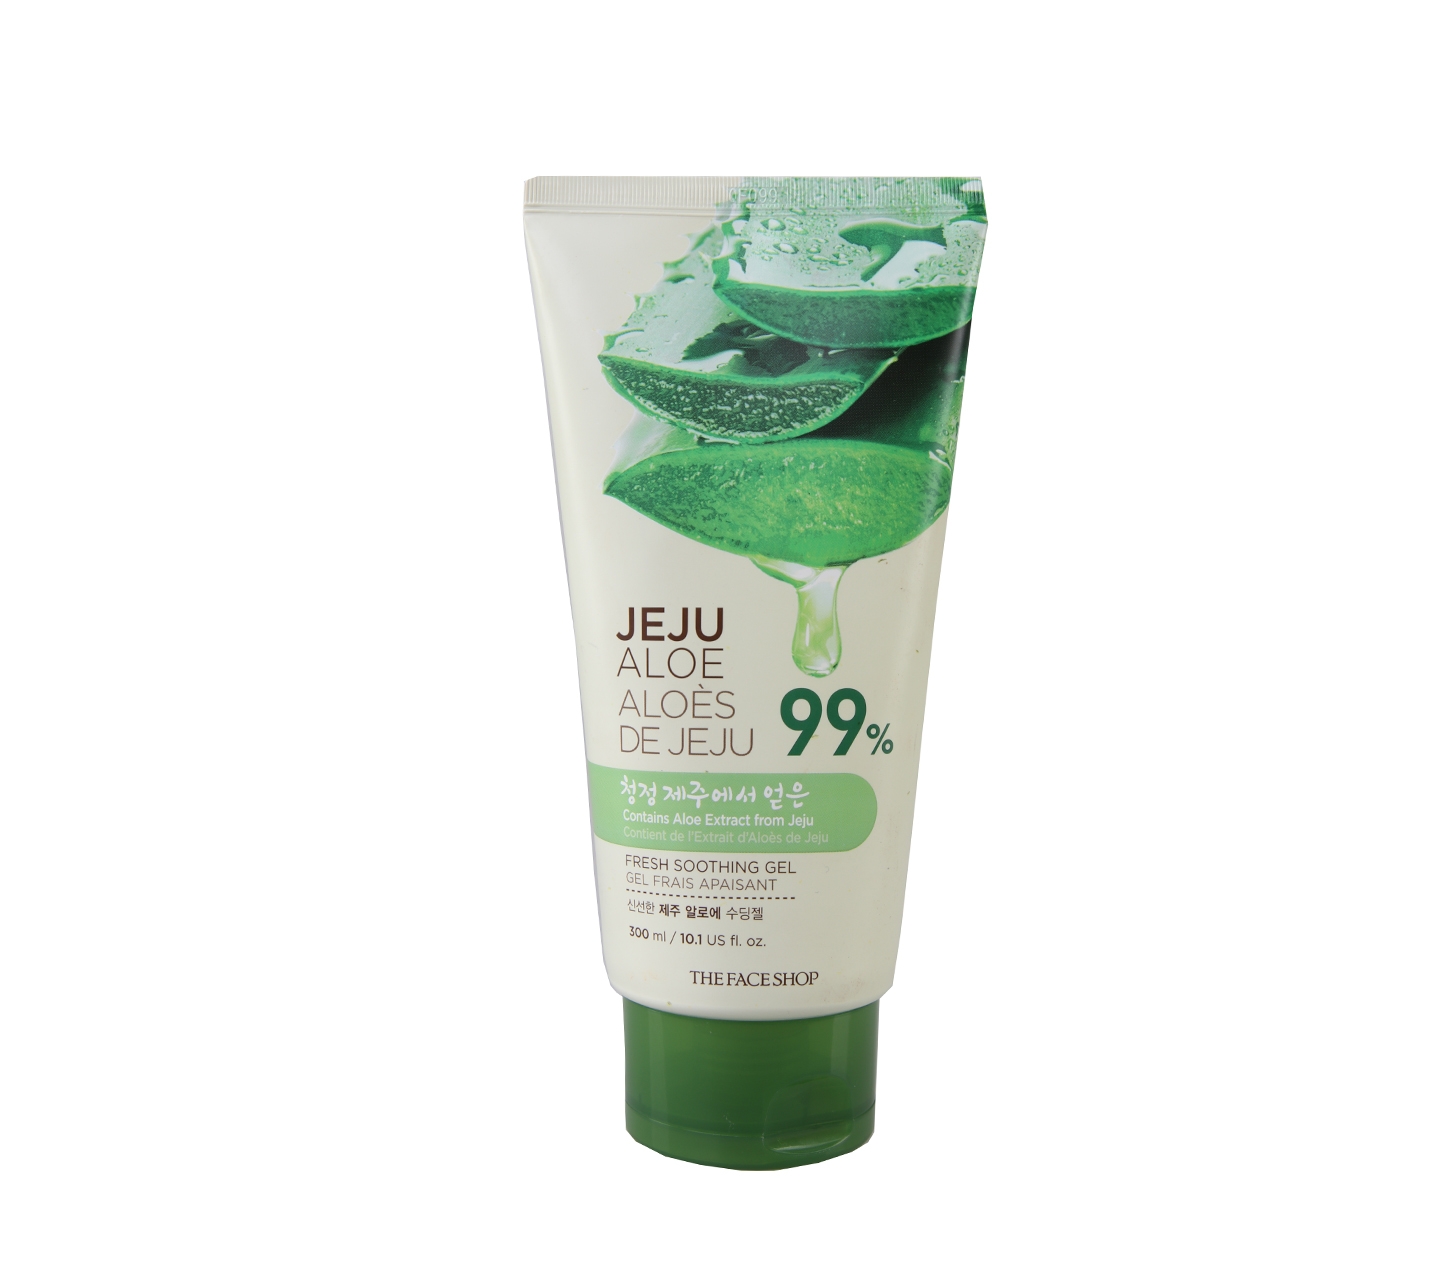 The Face Shop Jeju Aloe Fresh Soothing Gel Faces